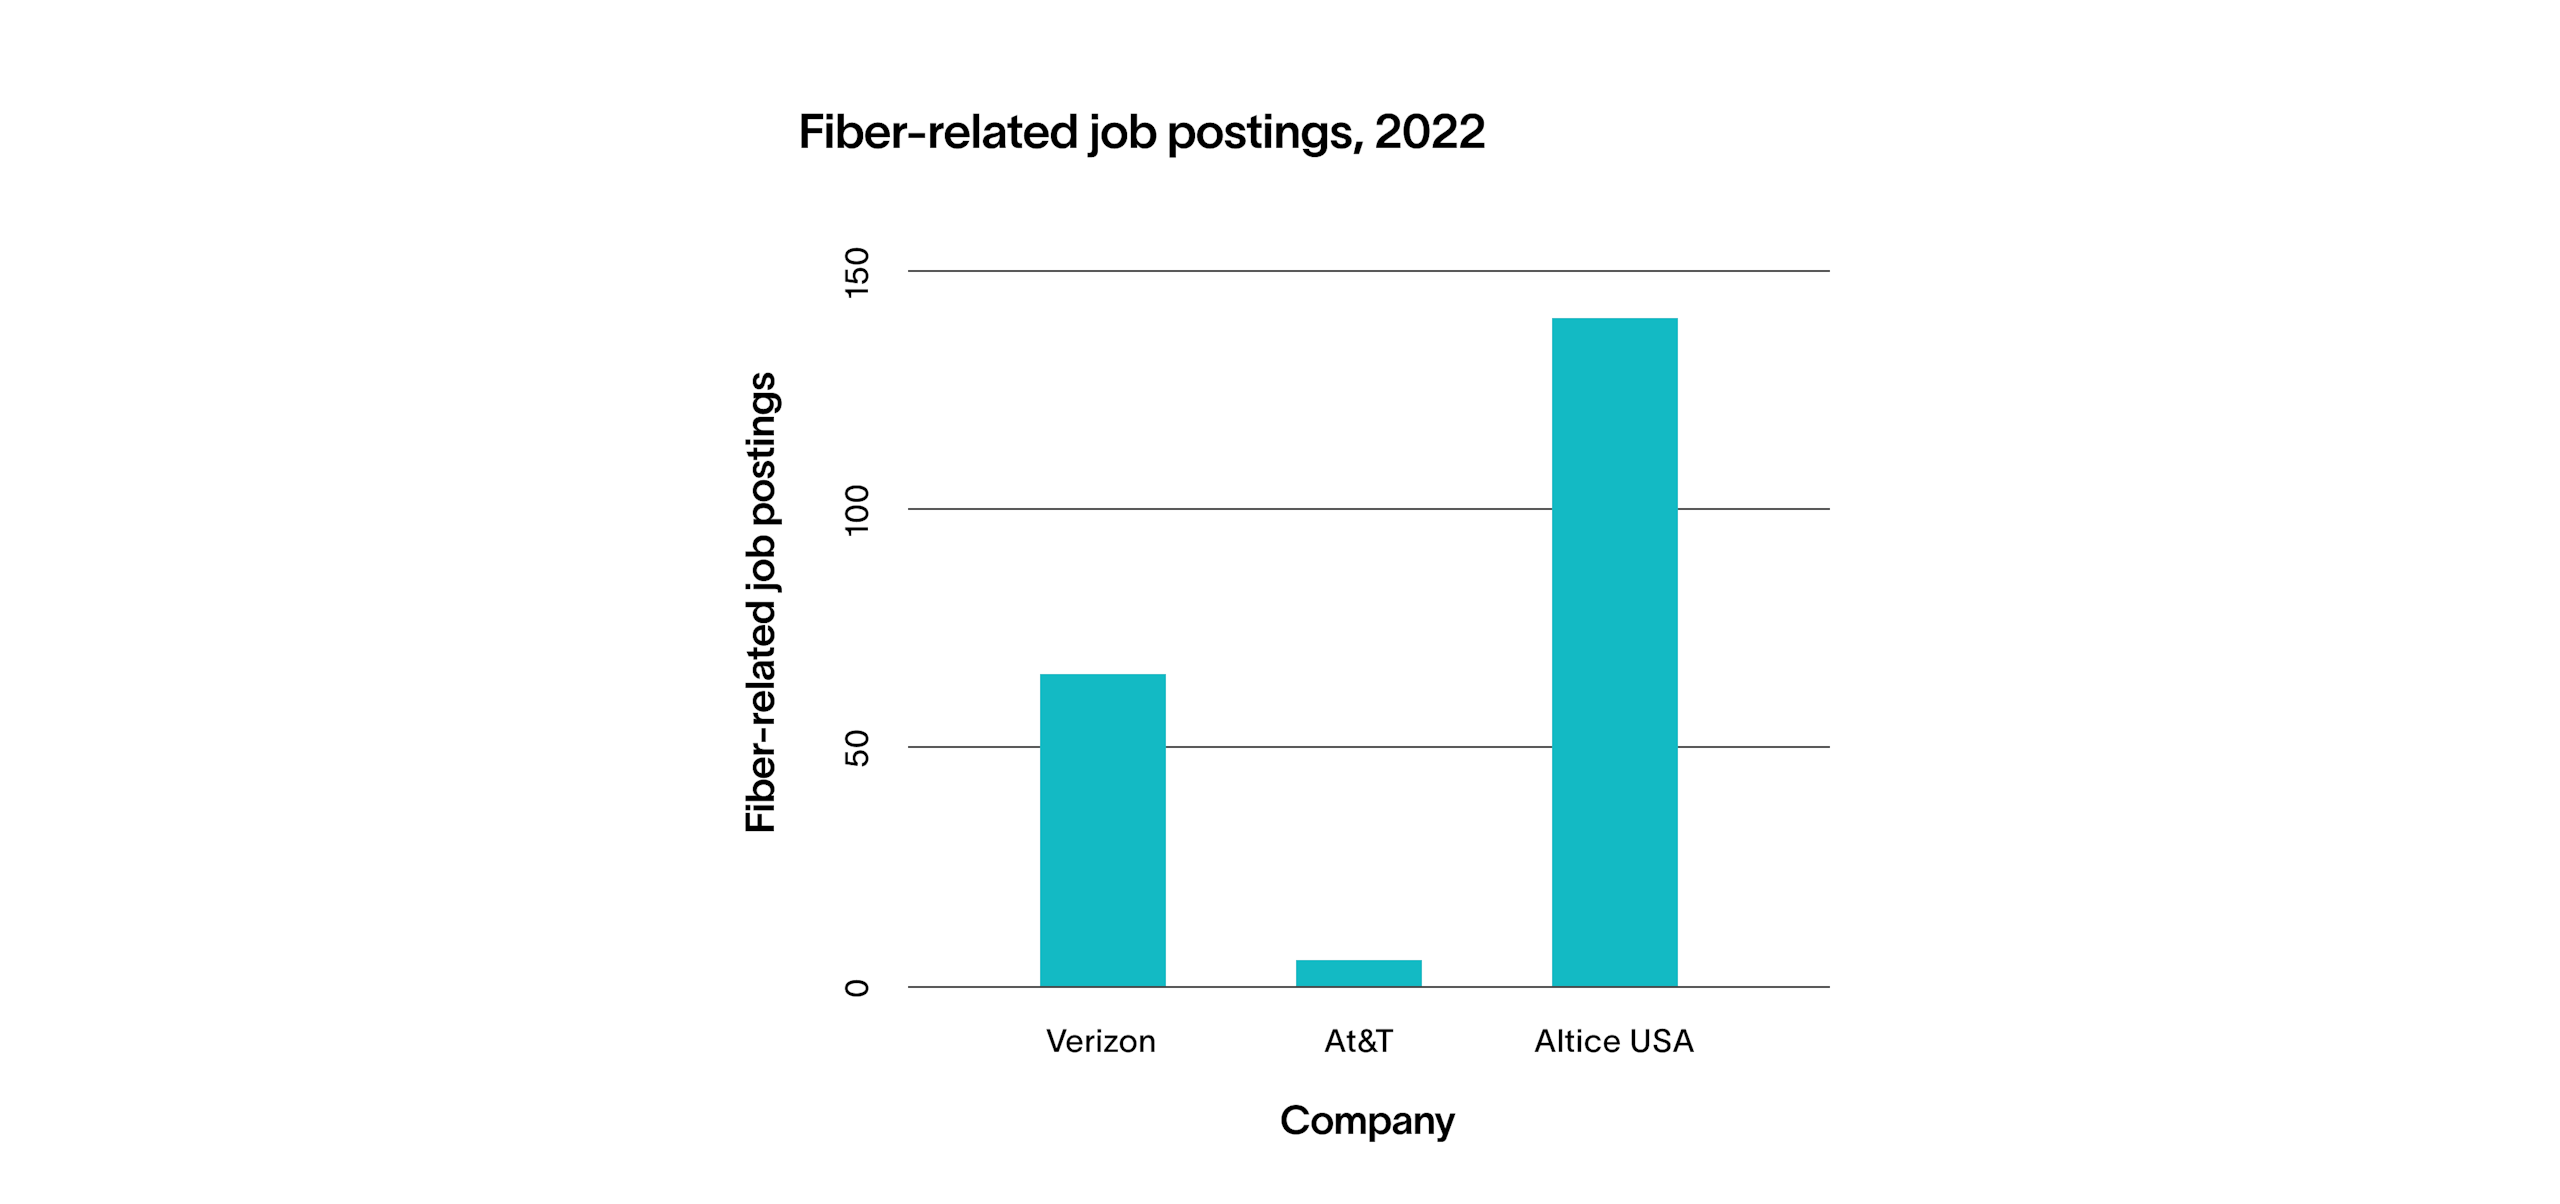 bar graph showing fiber-related job postings in 2022, with Altice USA having nearly twice as many as verizon, and AT&T with a fraction of that number